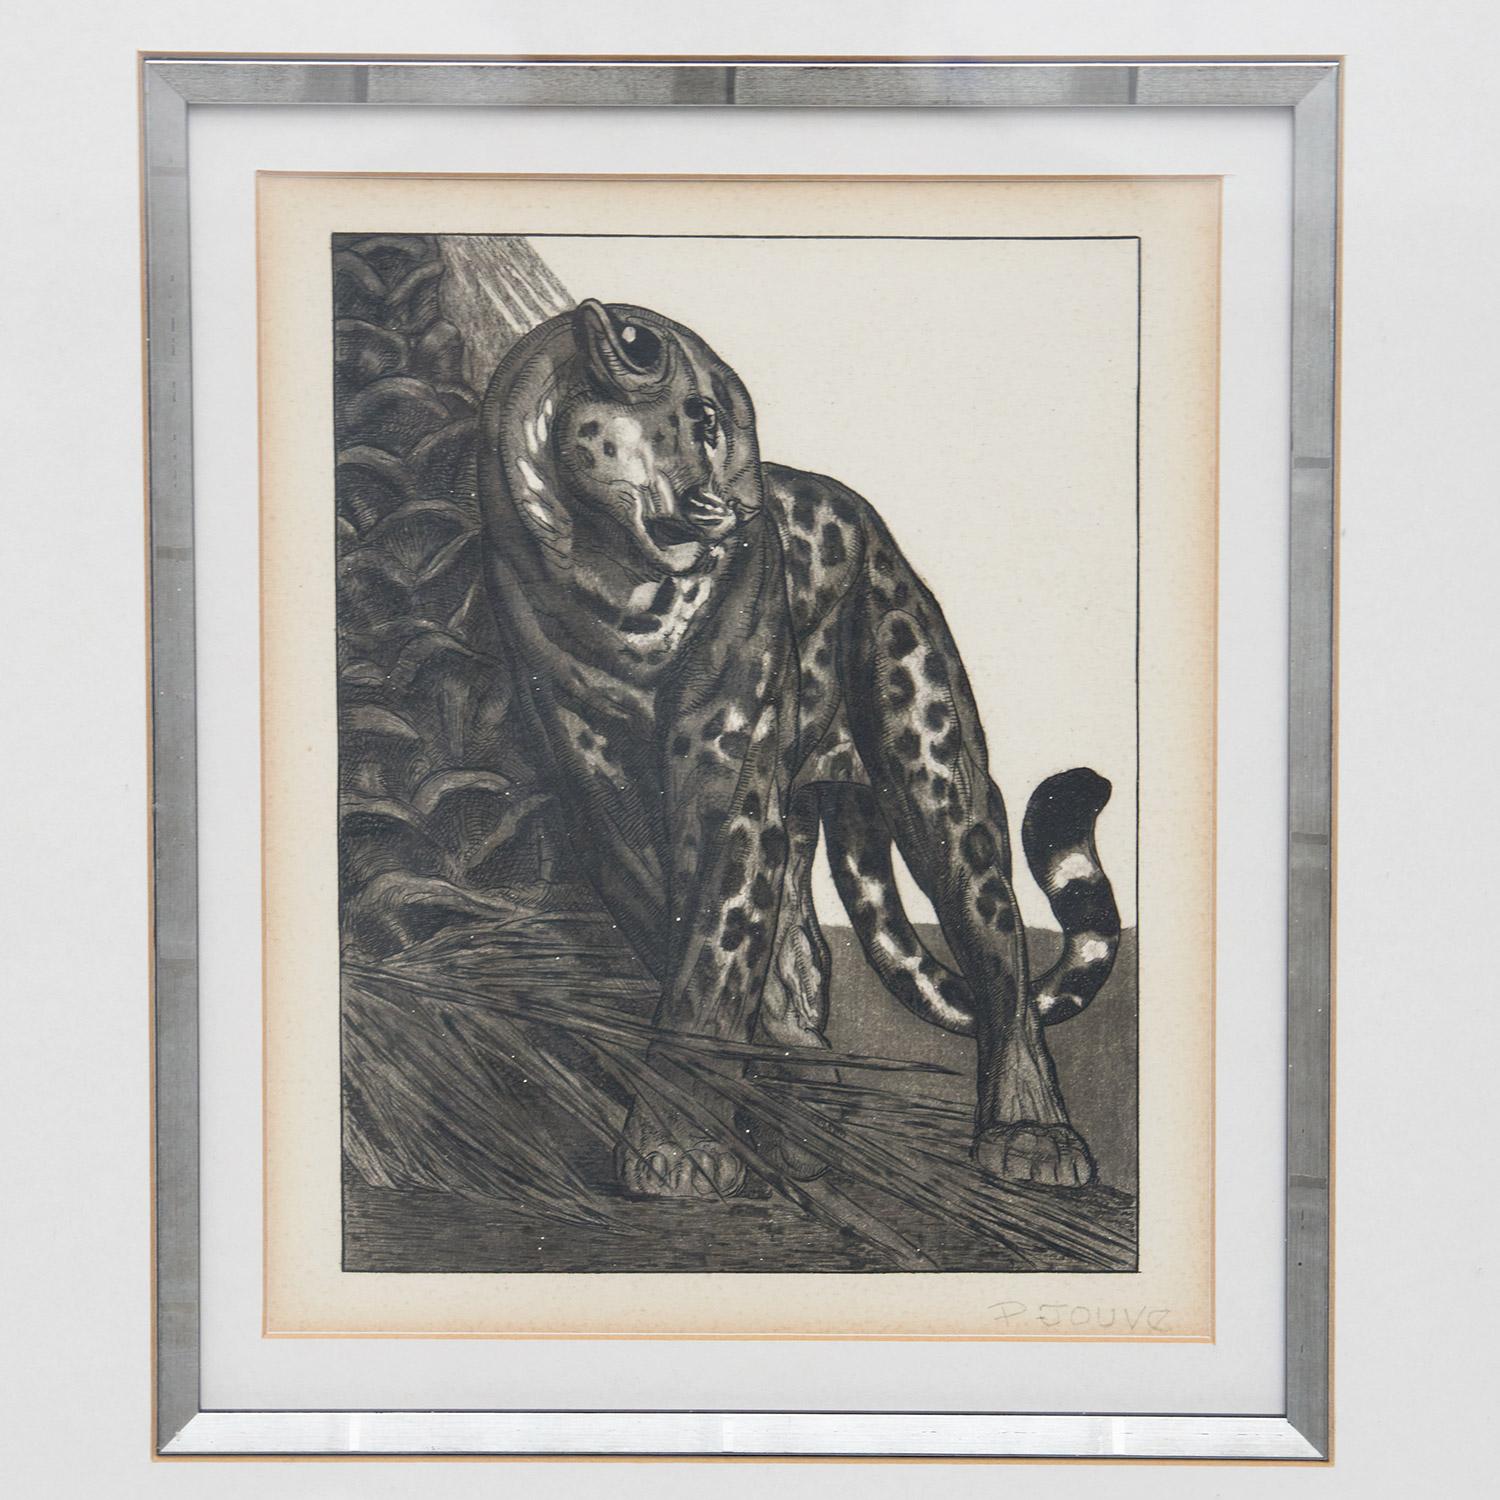 An etching on paper of a Leopard rubbing against a tree by Pierre-Paul Jouve (1878-1973). Signed 'P Jouve'

Paul Jouve was considered as one of the most famous animal painters of first half of the 20th century and an iconic figure of the Art Deco